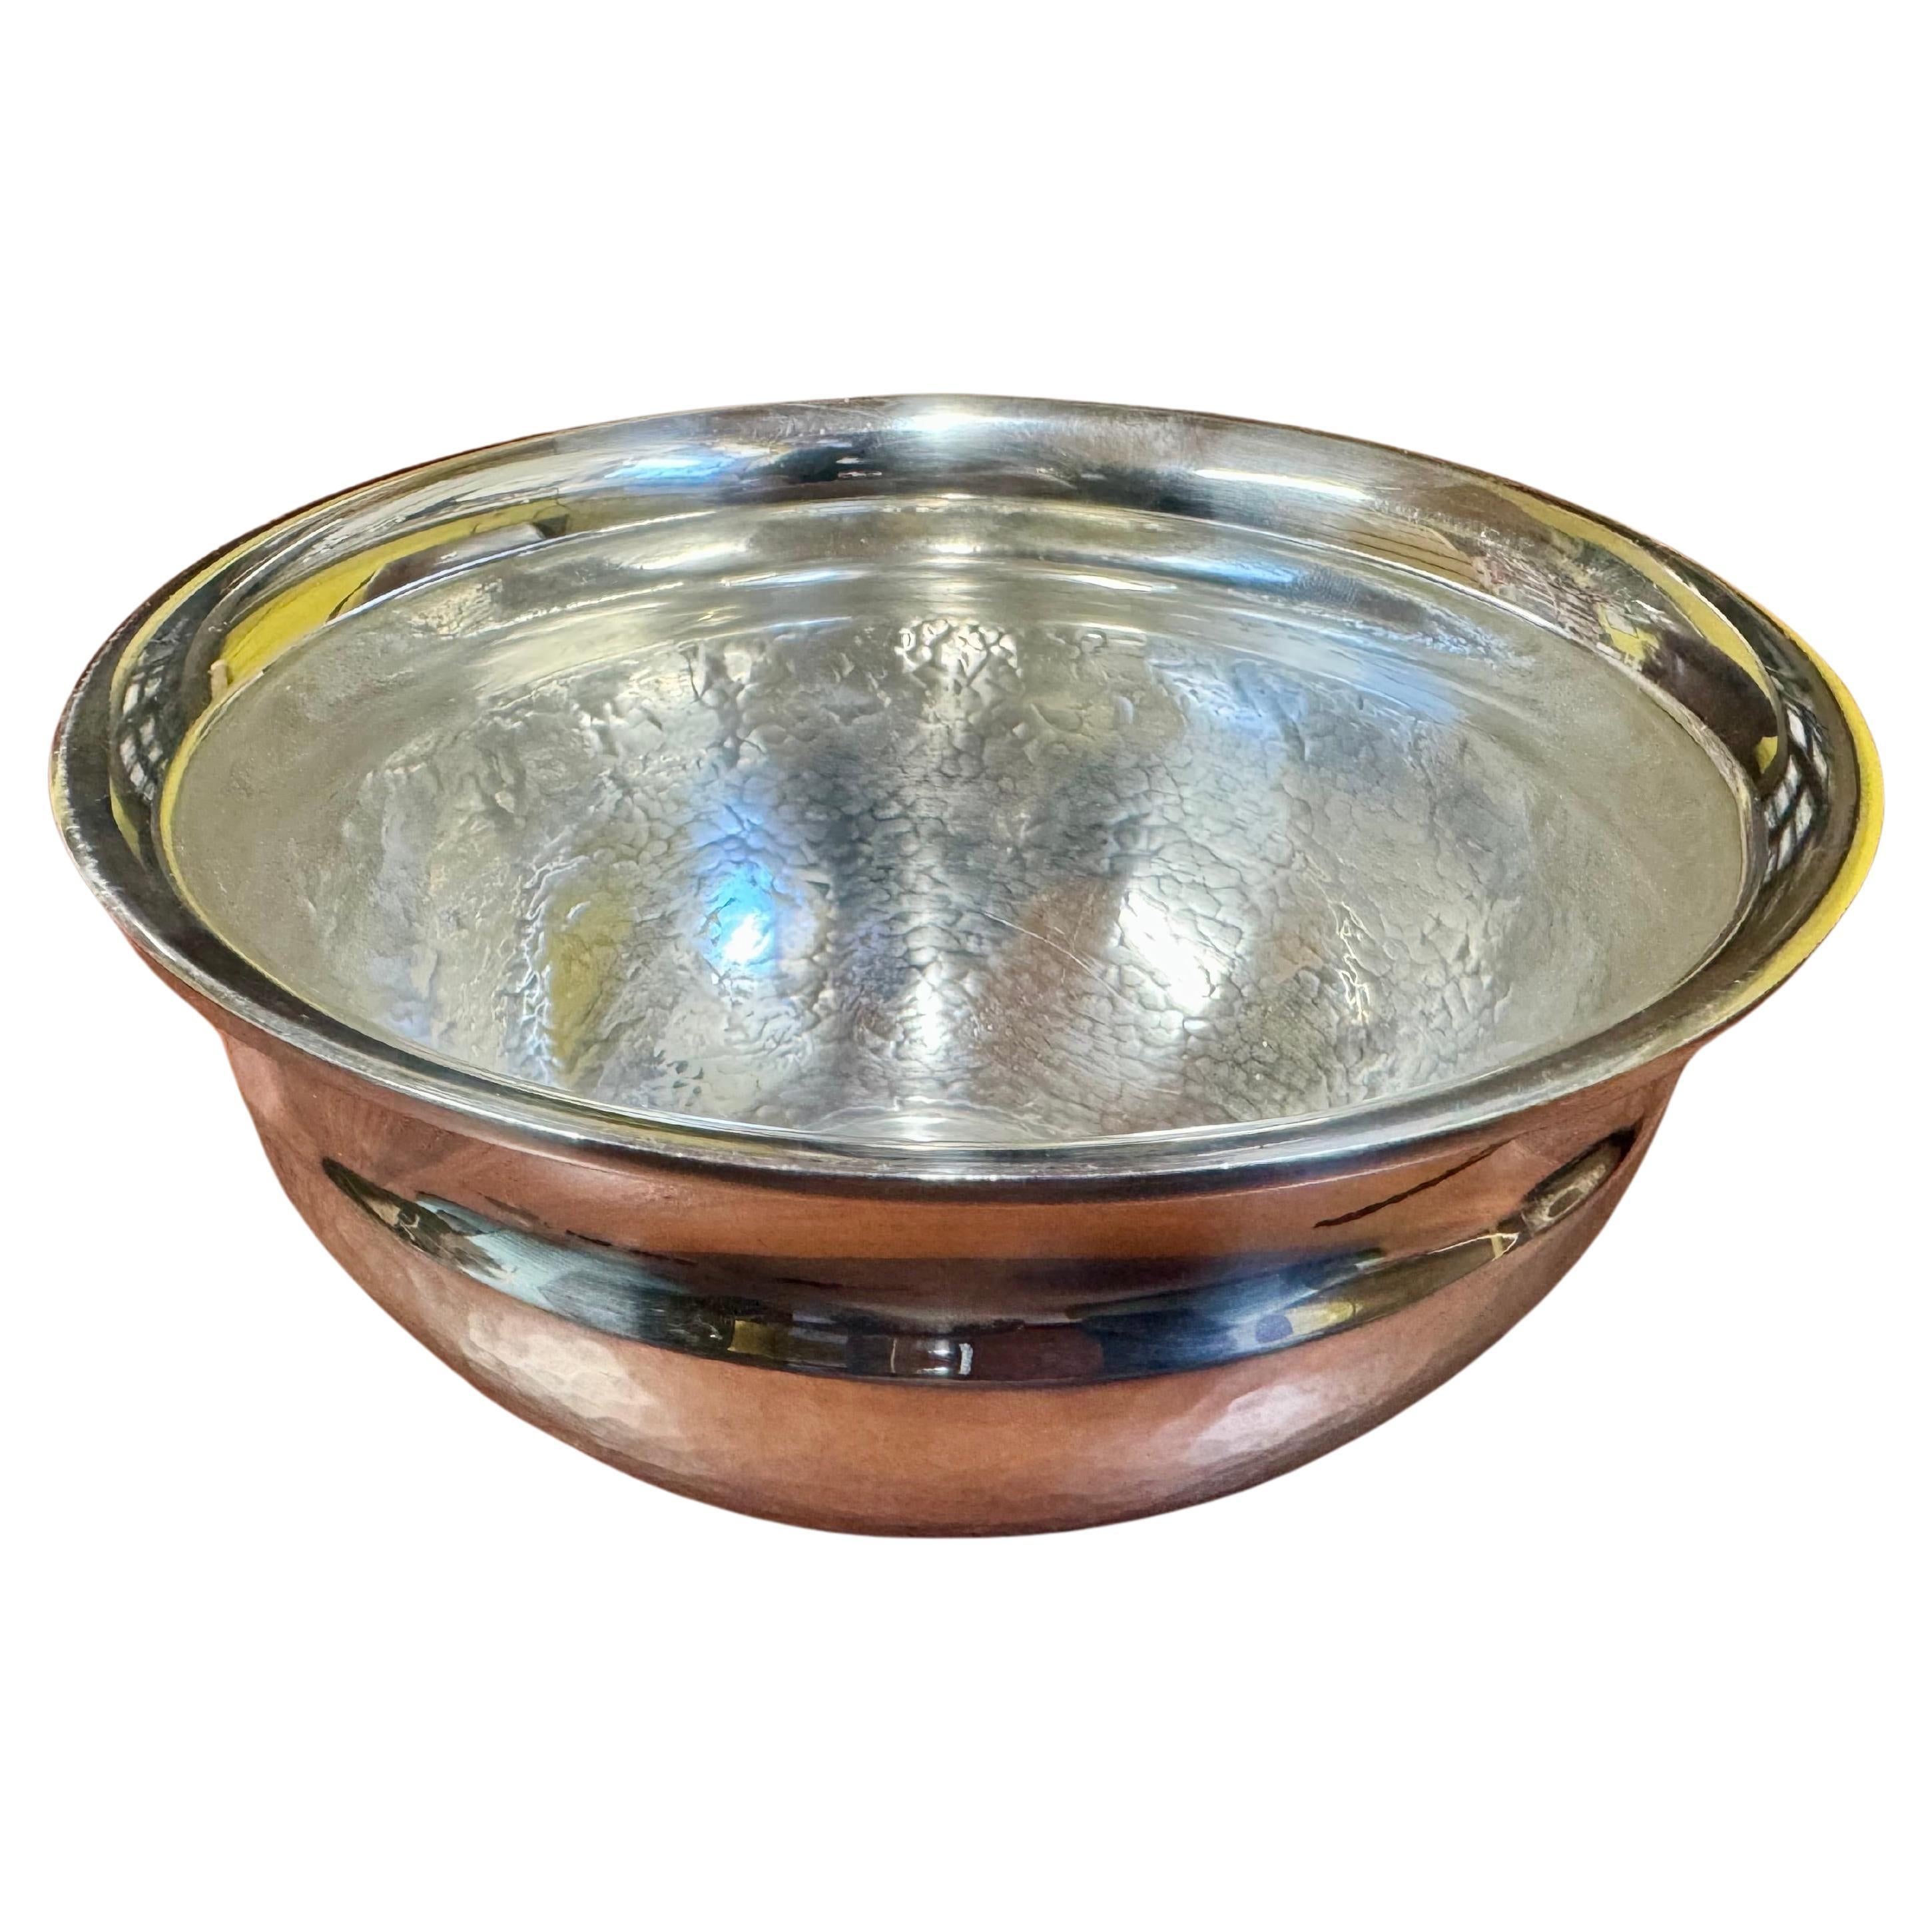 Hammered Silver Bowl by Tapio Wirkkala, TW 278, Finland, 1968 Decorative Bowl For Sale